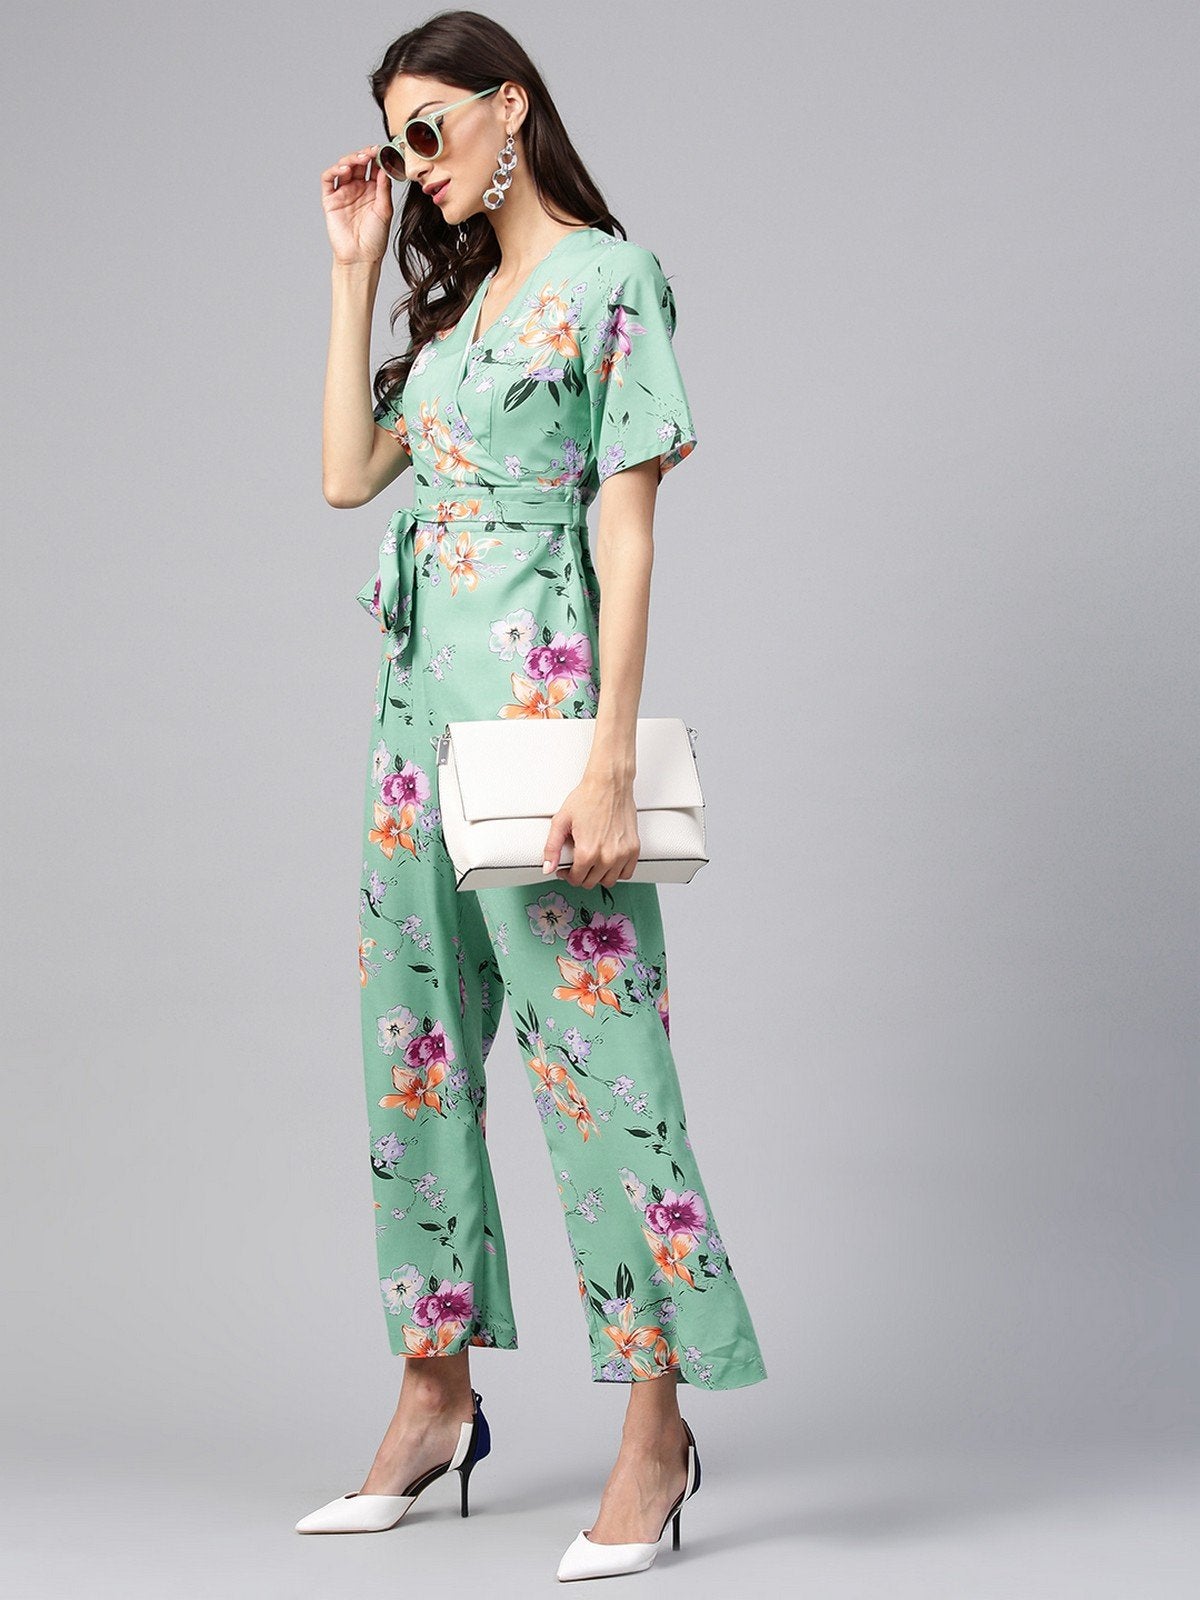 Women's Floral Overlapping Jumpsuit - Pannkh